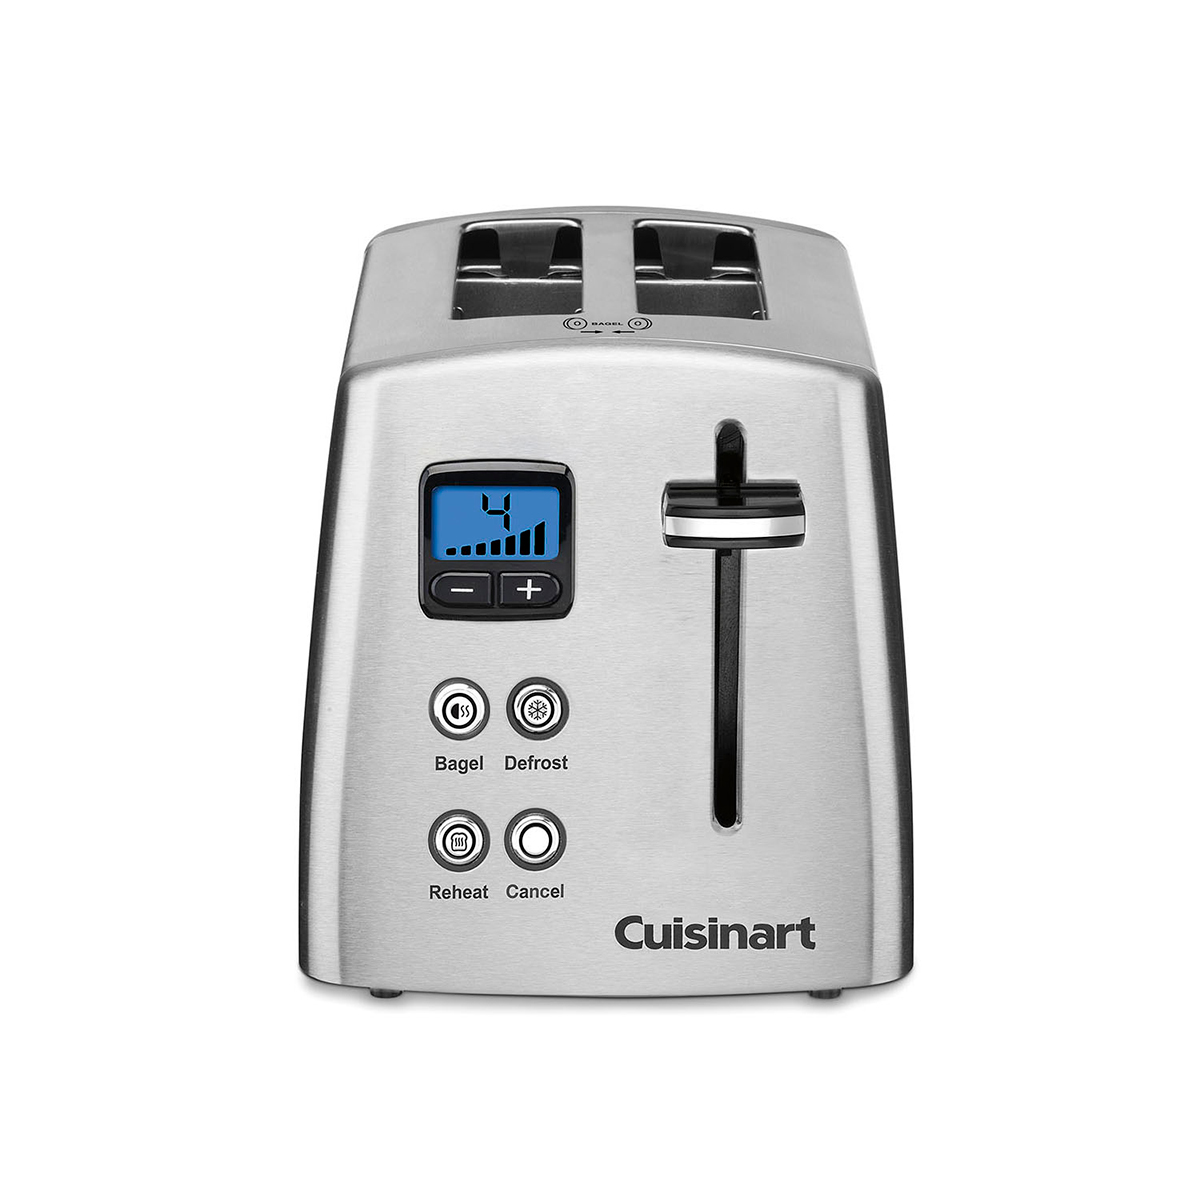 Cuisinart(R) Stainless Steel 2 Slice Countdown Toaster